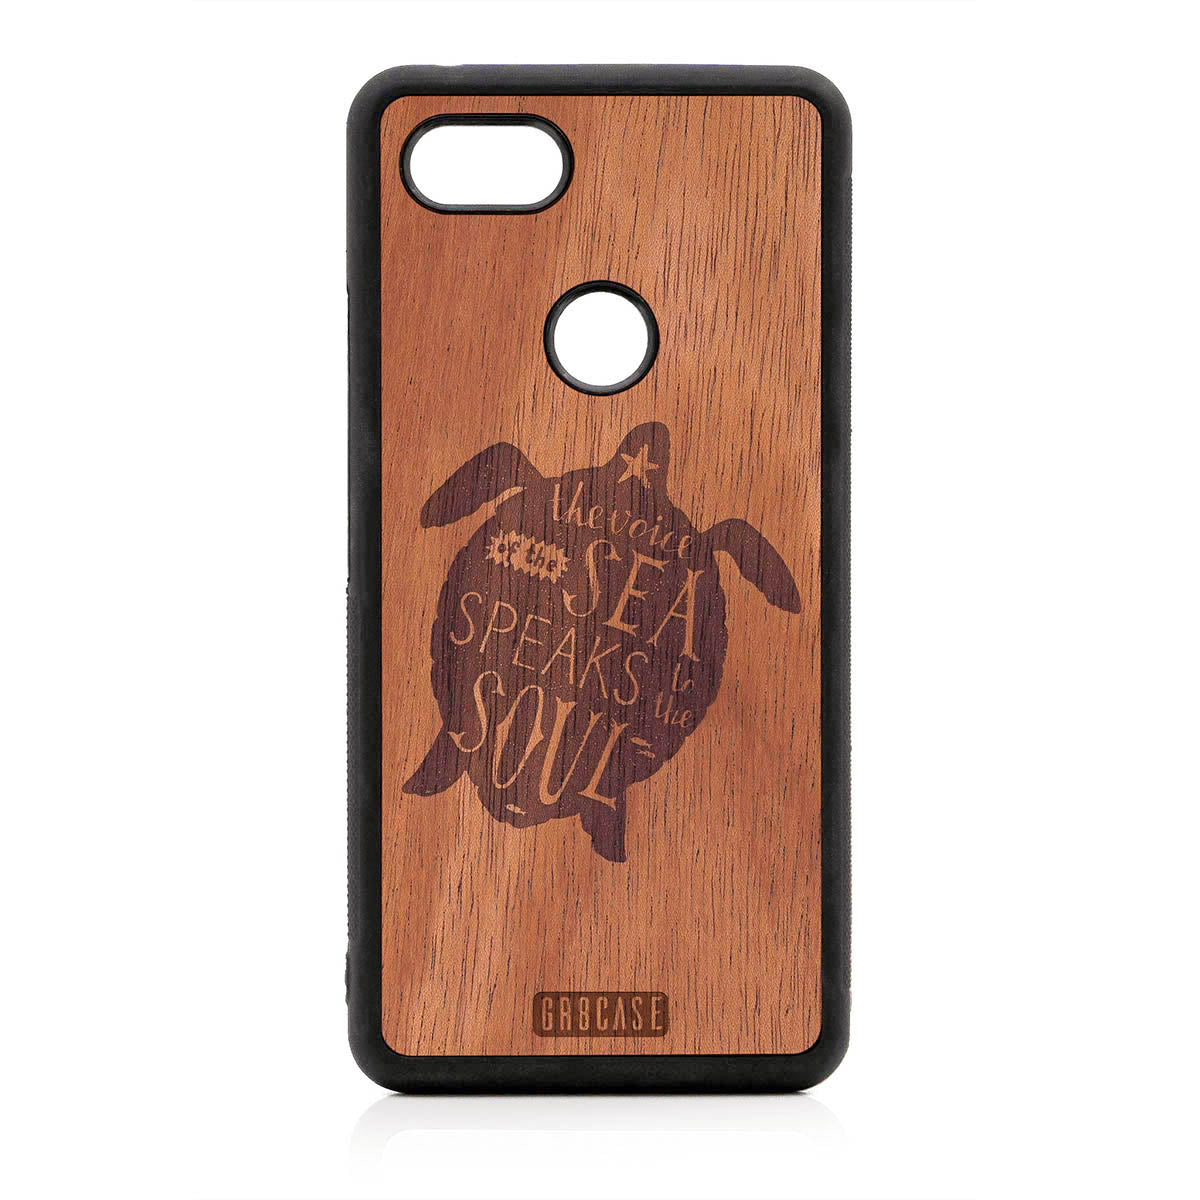 The Voice Of The Sea Speaks To The Soul (Turtle) Design Wood Case For Google Pixel 3A XL